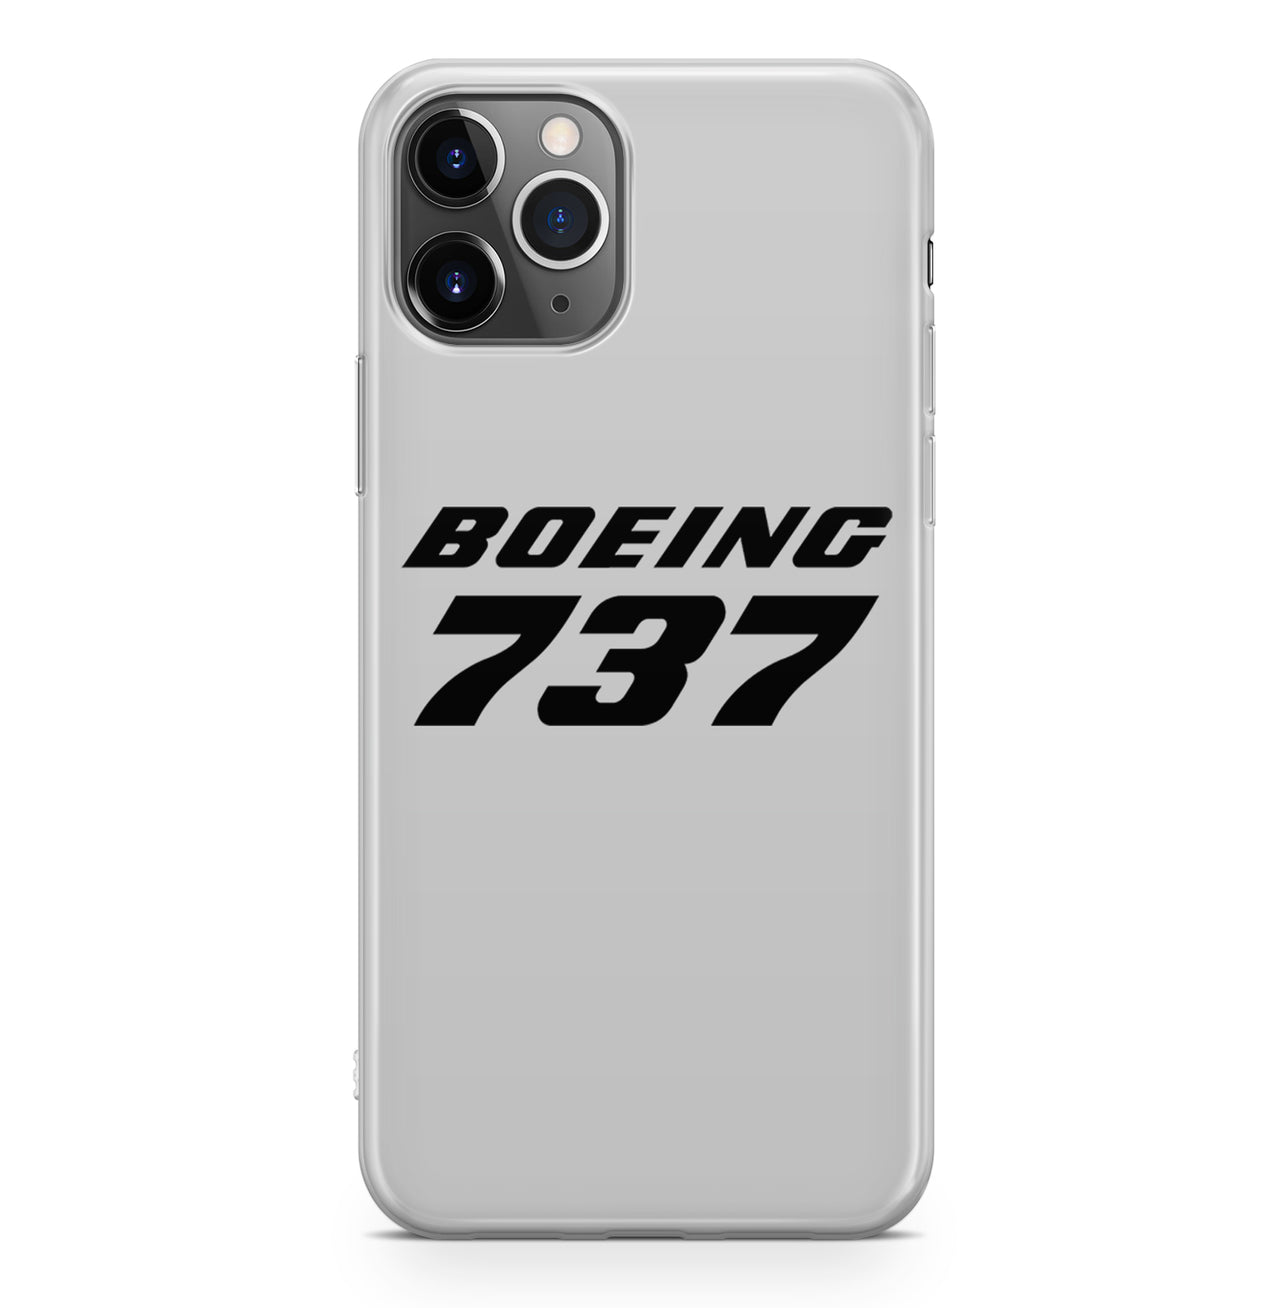 Boeing 737 & Text Designed iPhone Cases